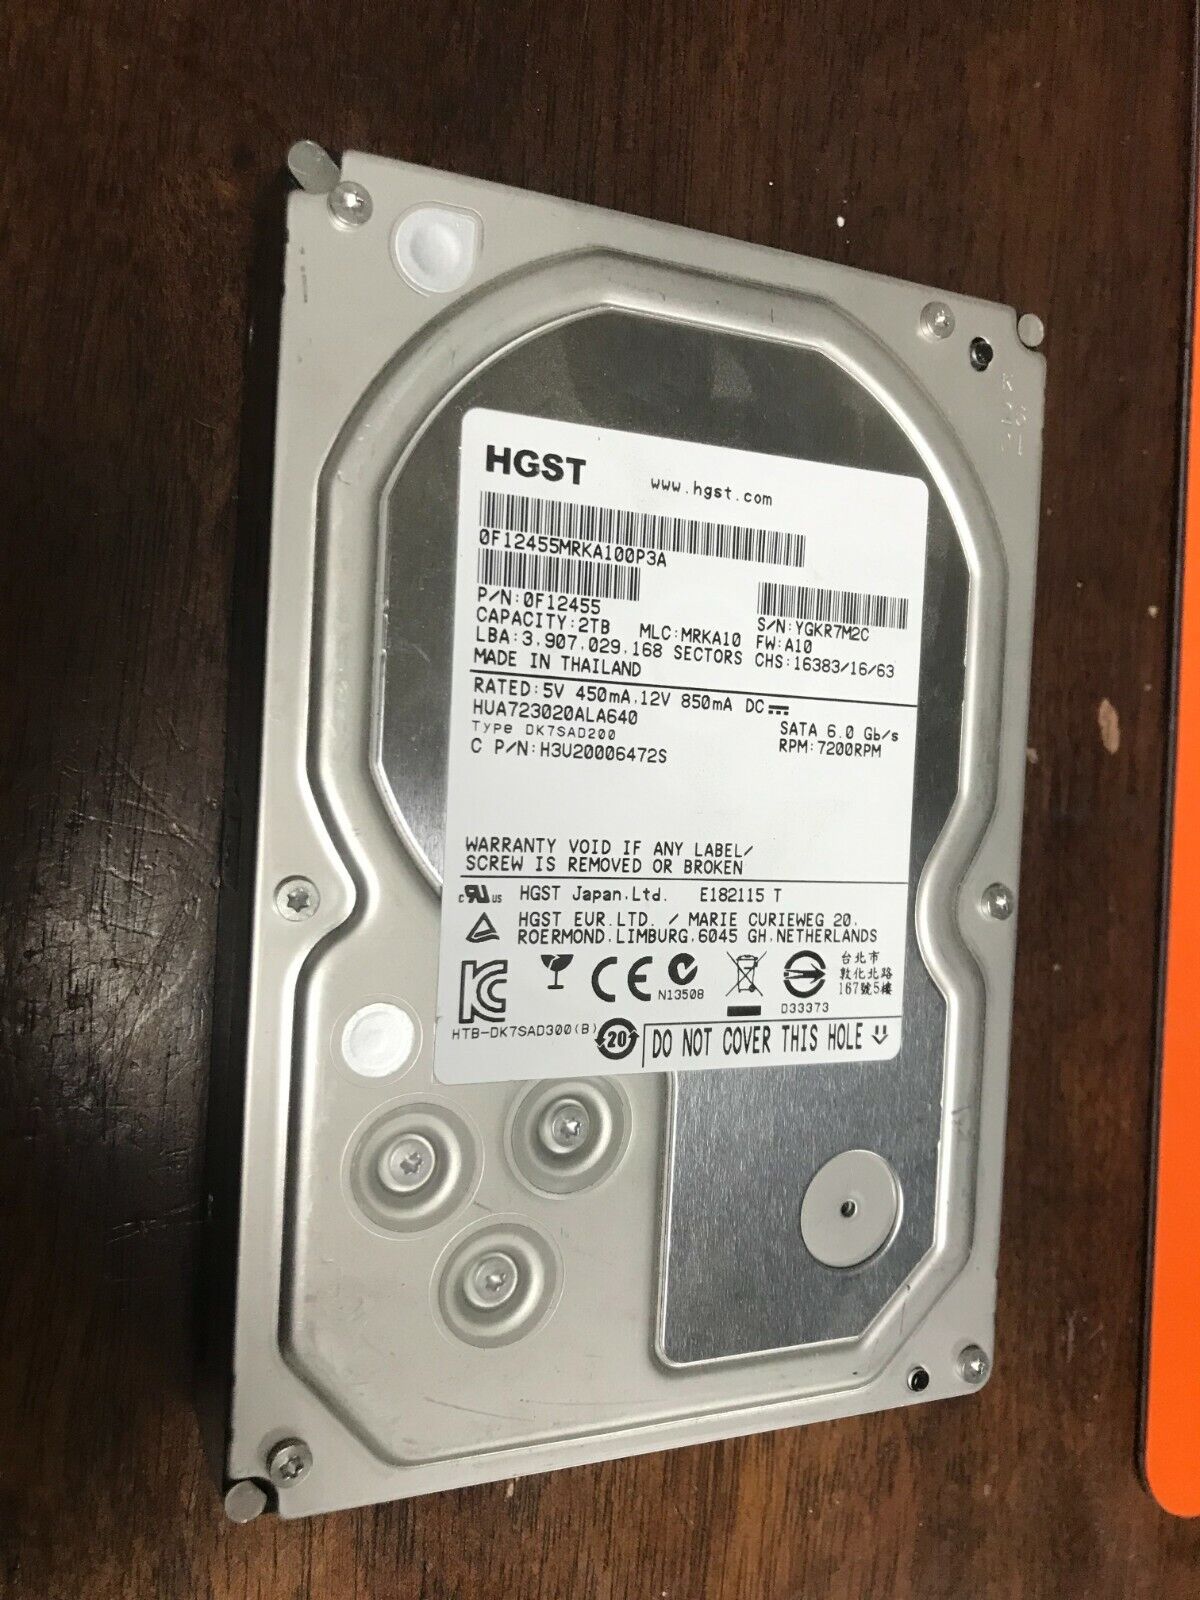 2TB Hard Drives - Various Brands - Pulled from internally owed server - Working